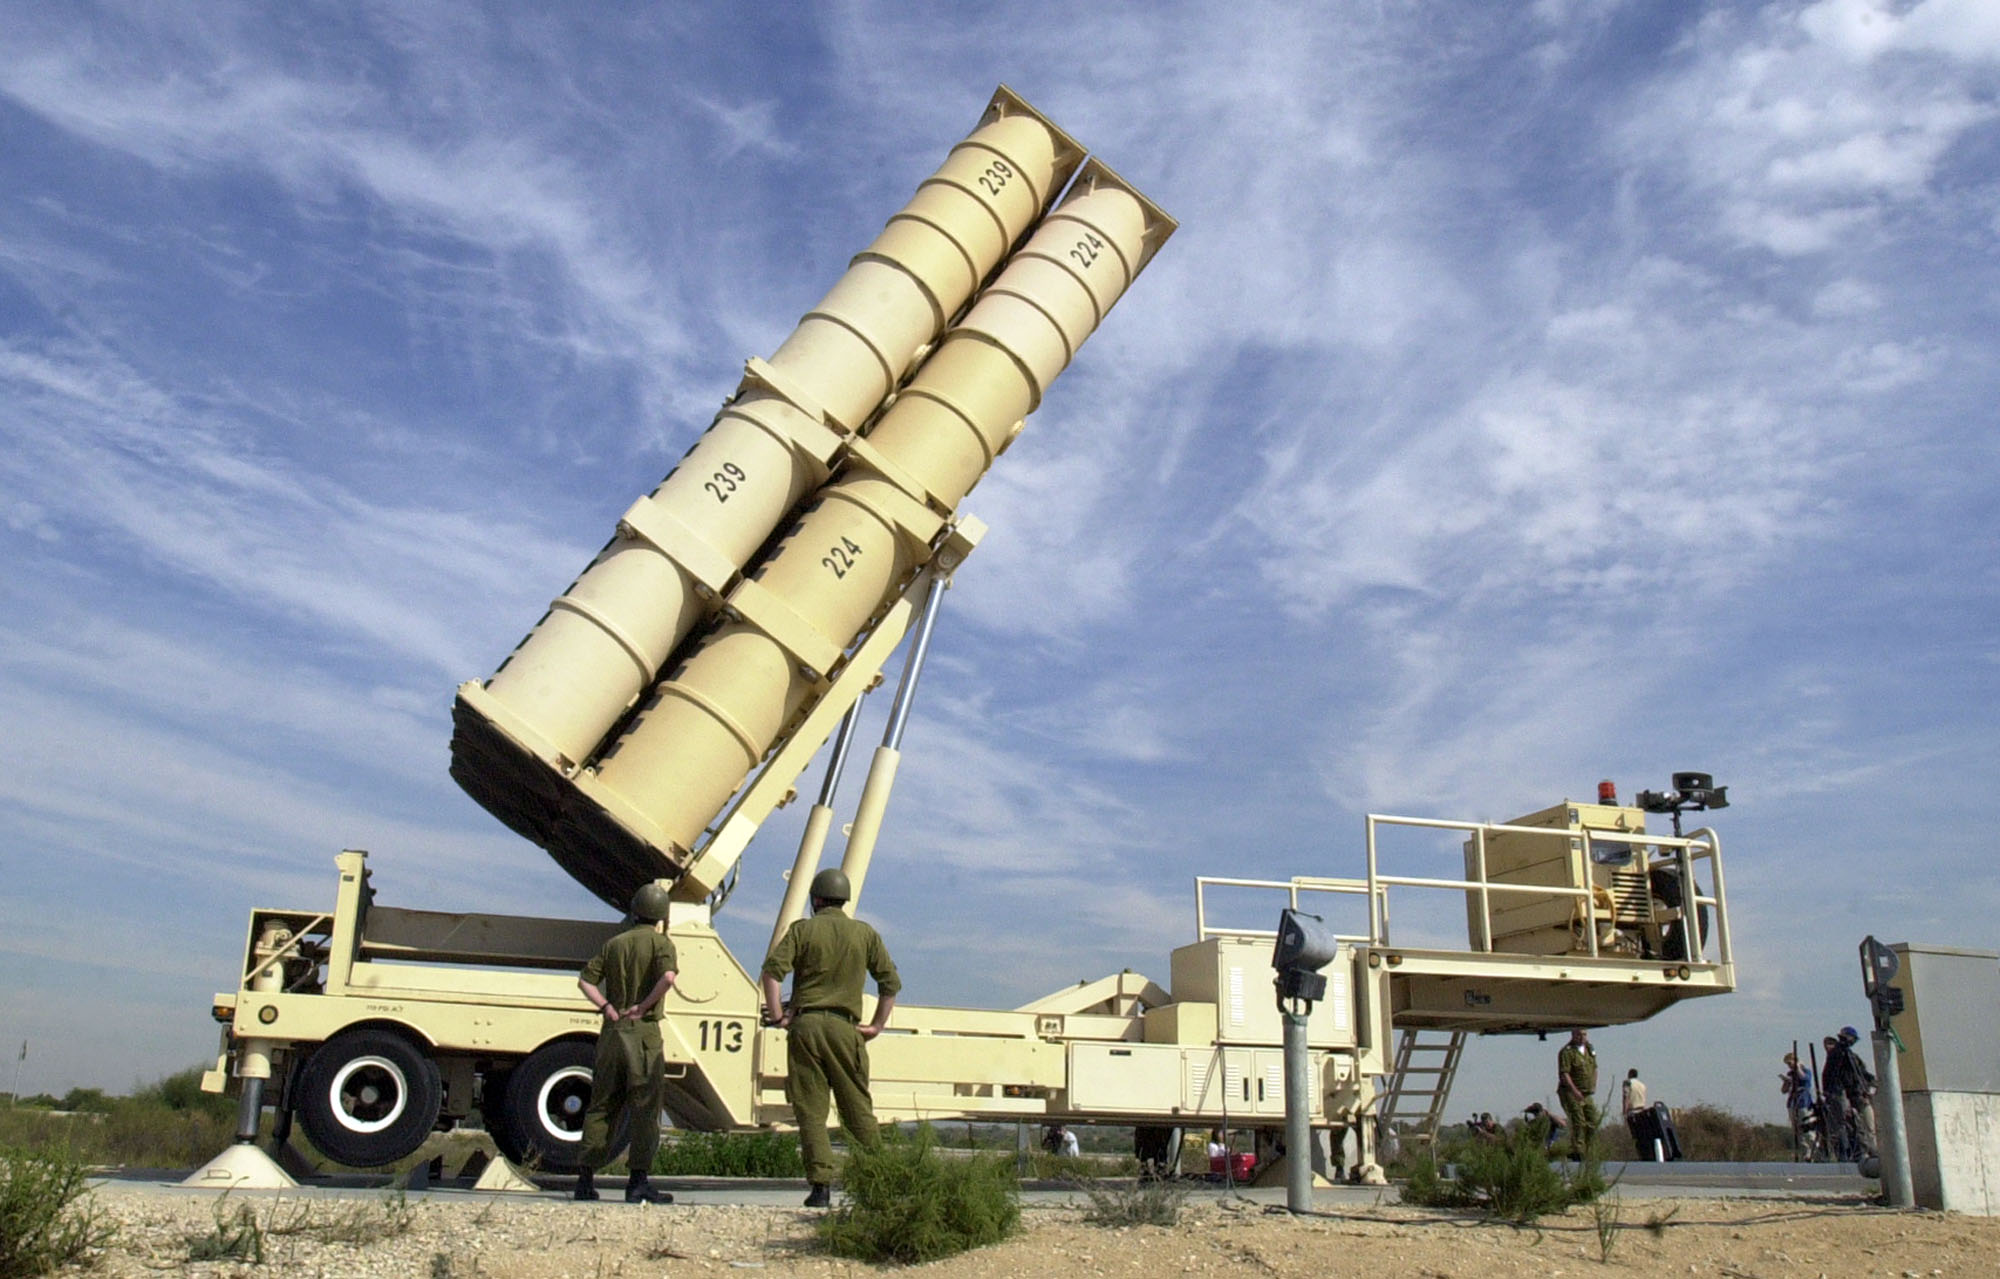 Monster Machines: Israel’s National Missile Shield Could Shoot Satellites Out Of Orbit